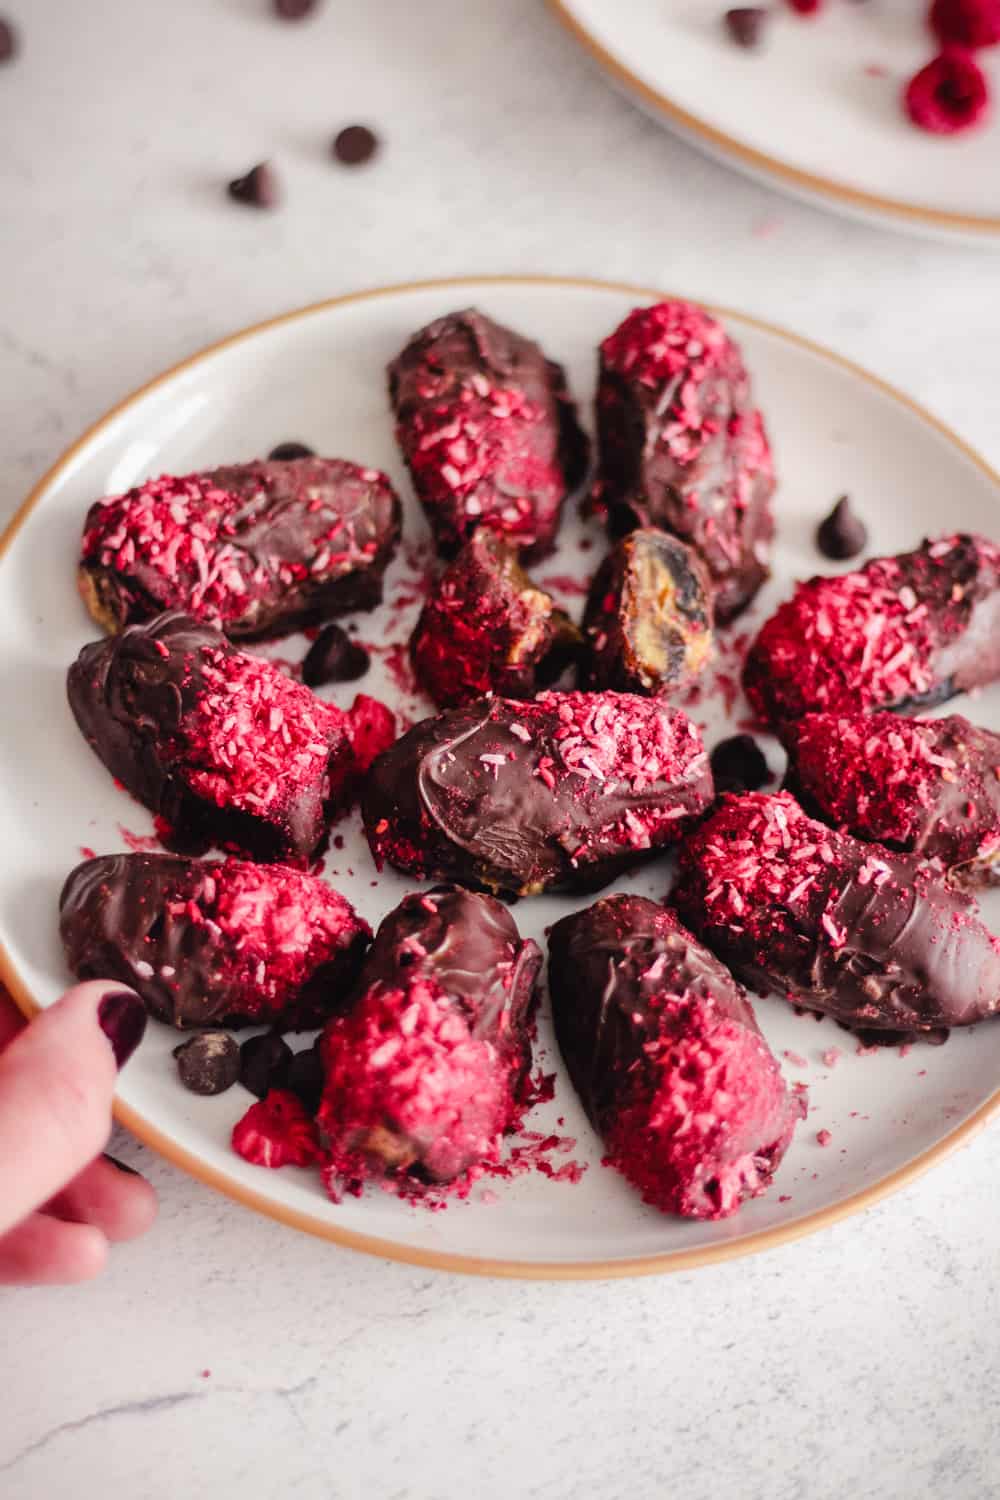 Hand holding a plate of chocolate dates with raspberry topping.